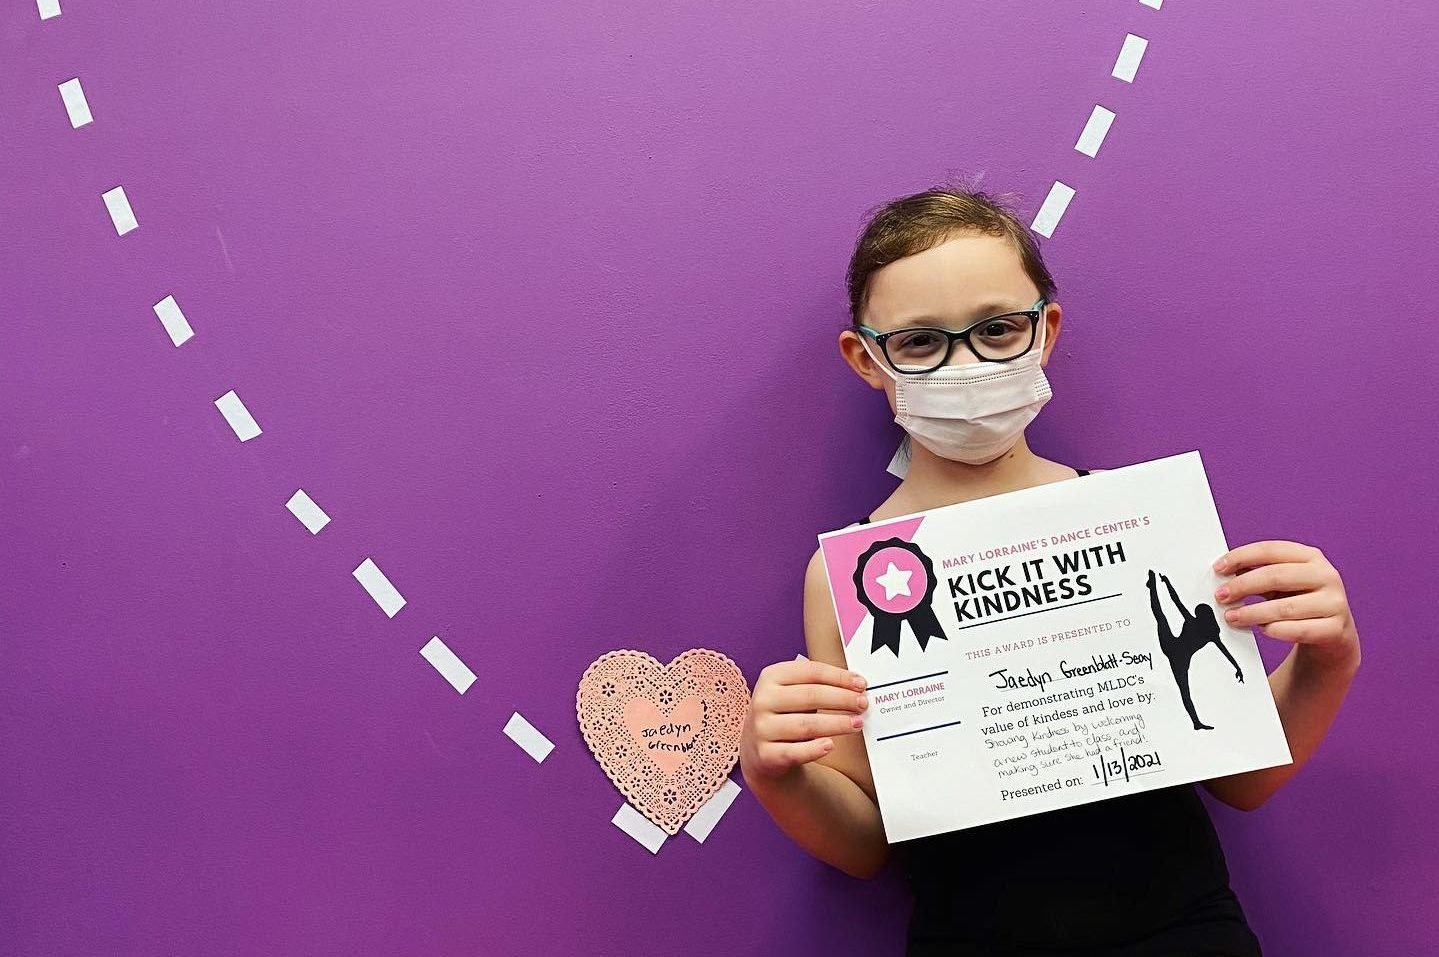 A dance student wearing a mask poses holding a certificate in front of a purple wall with a white-outline heart on it.